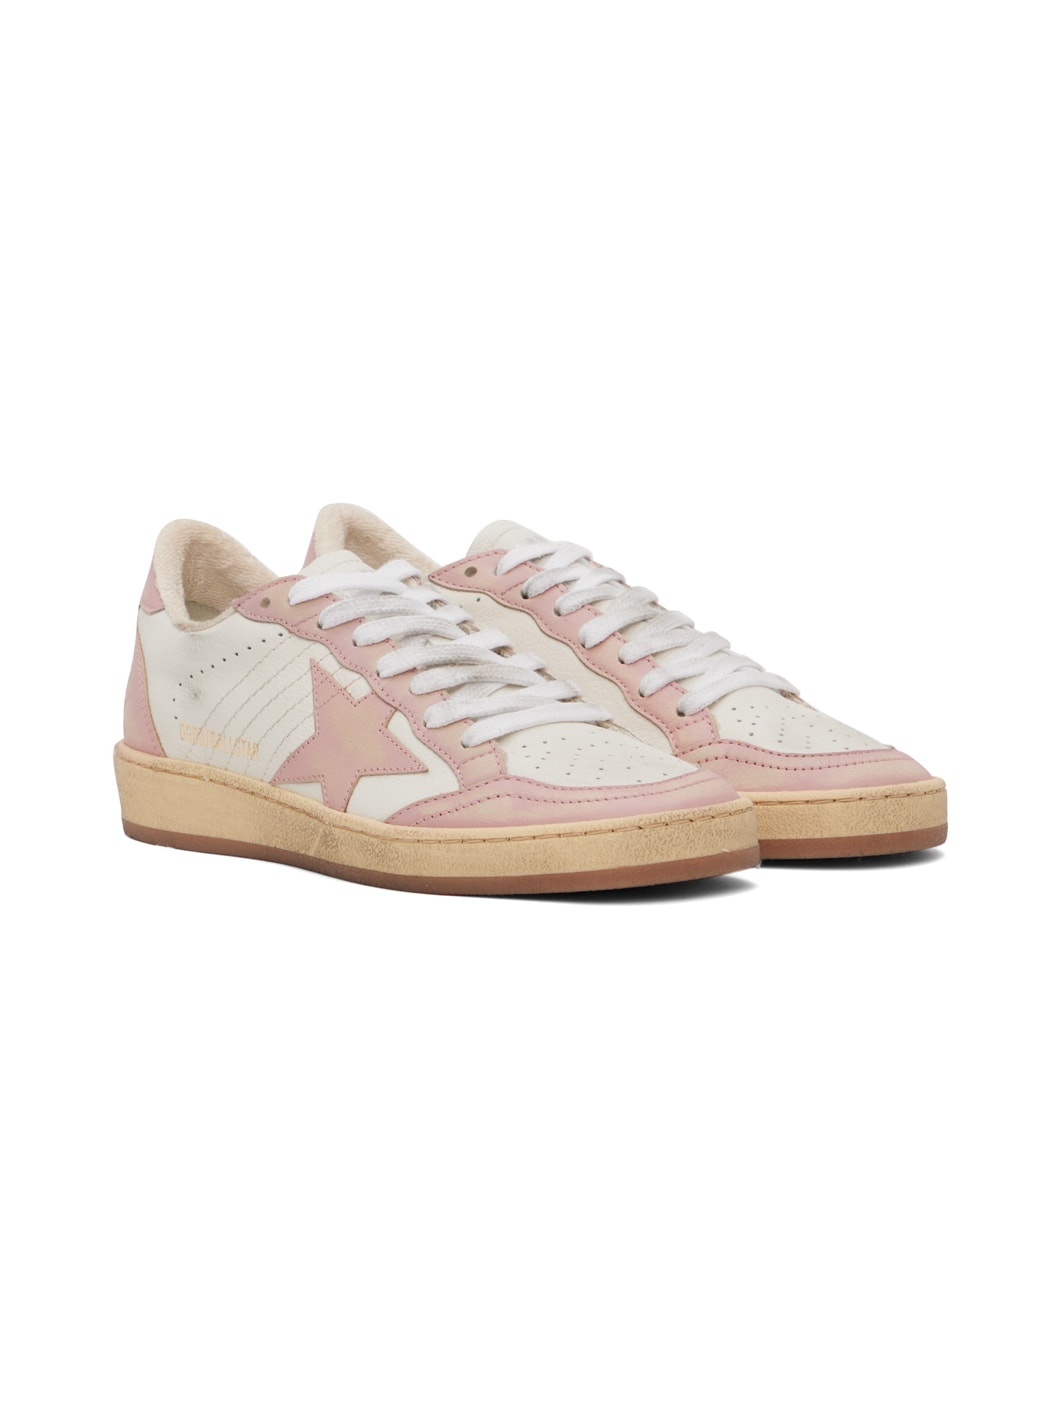 White & Pink Ball Star Sneakers - 4